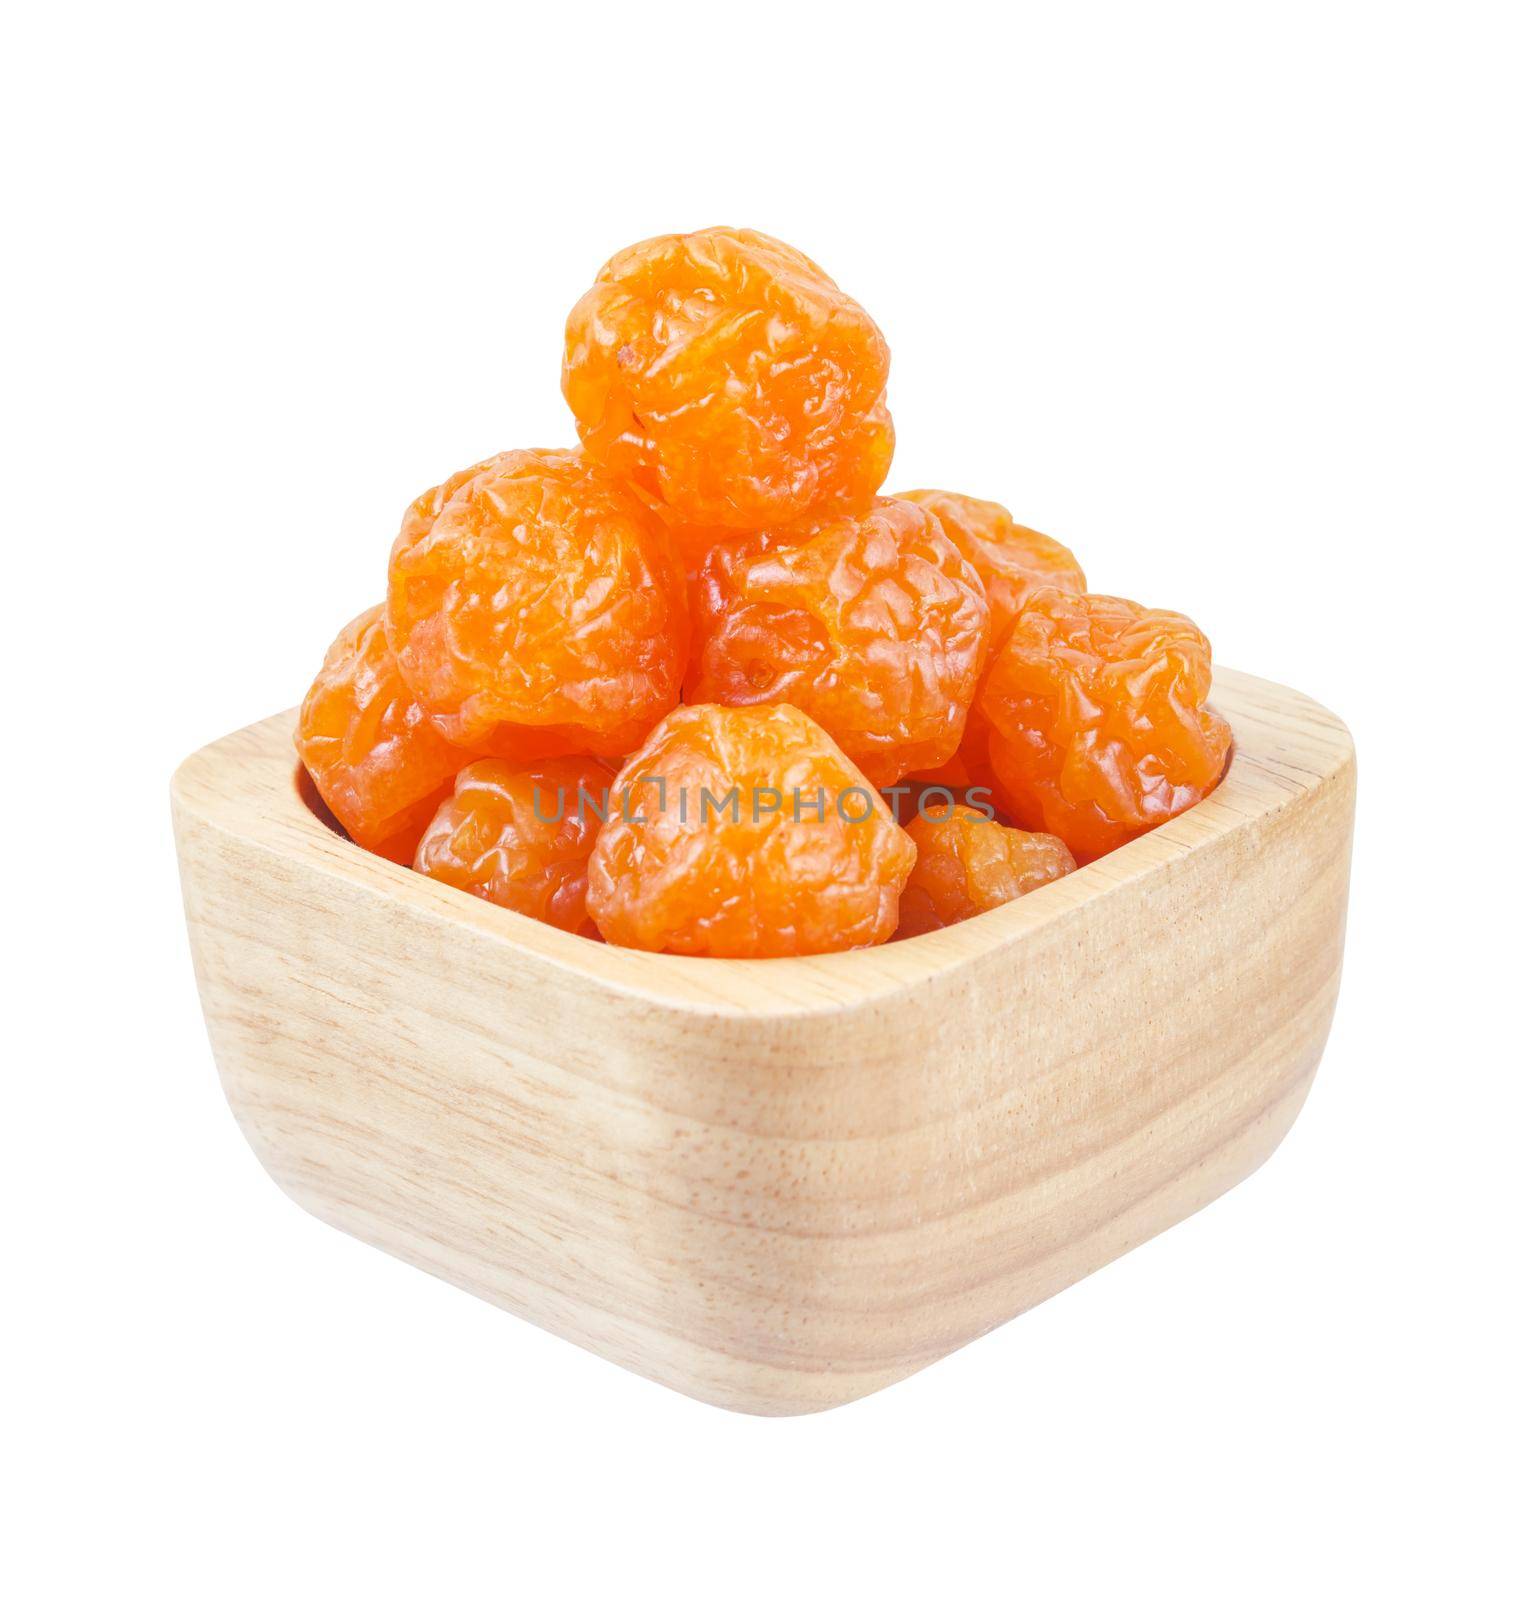 Dried prunes fruits (Preserved fruits Chinese plum) in wooden bowl isolated on white background, save clipping path.